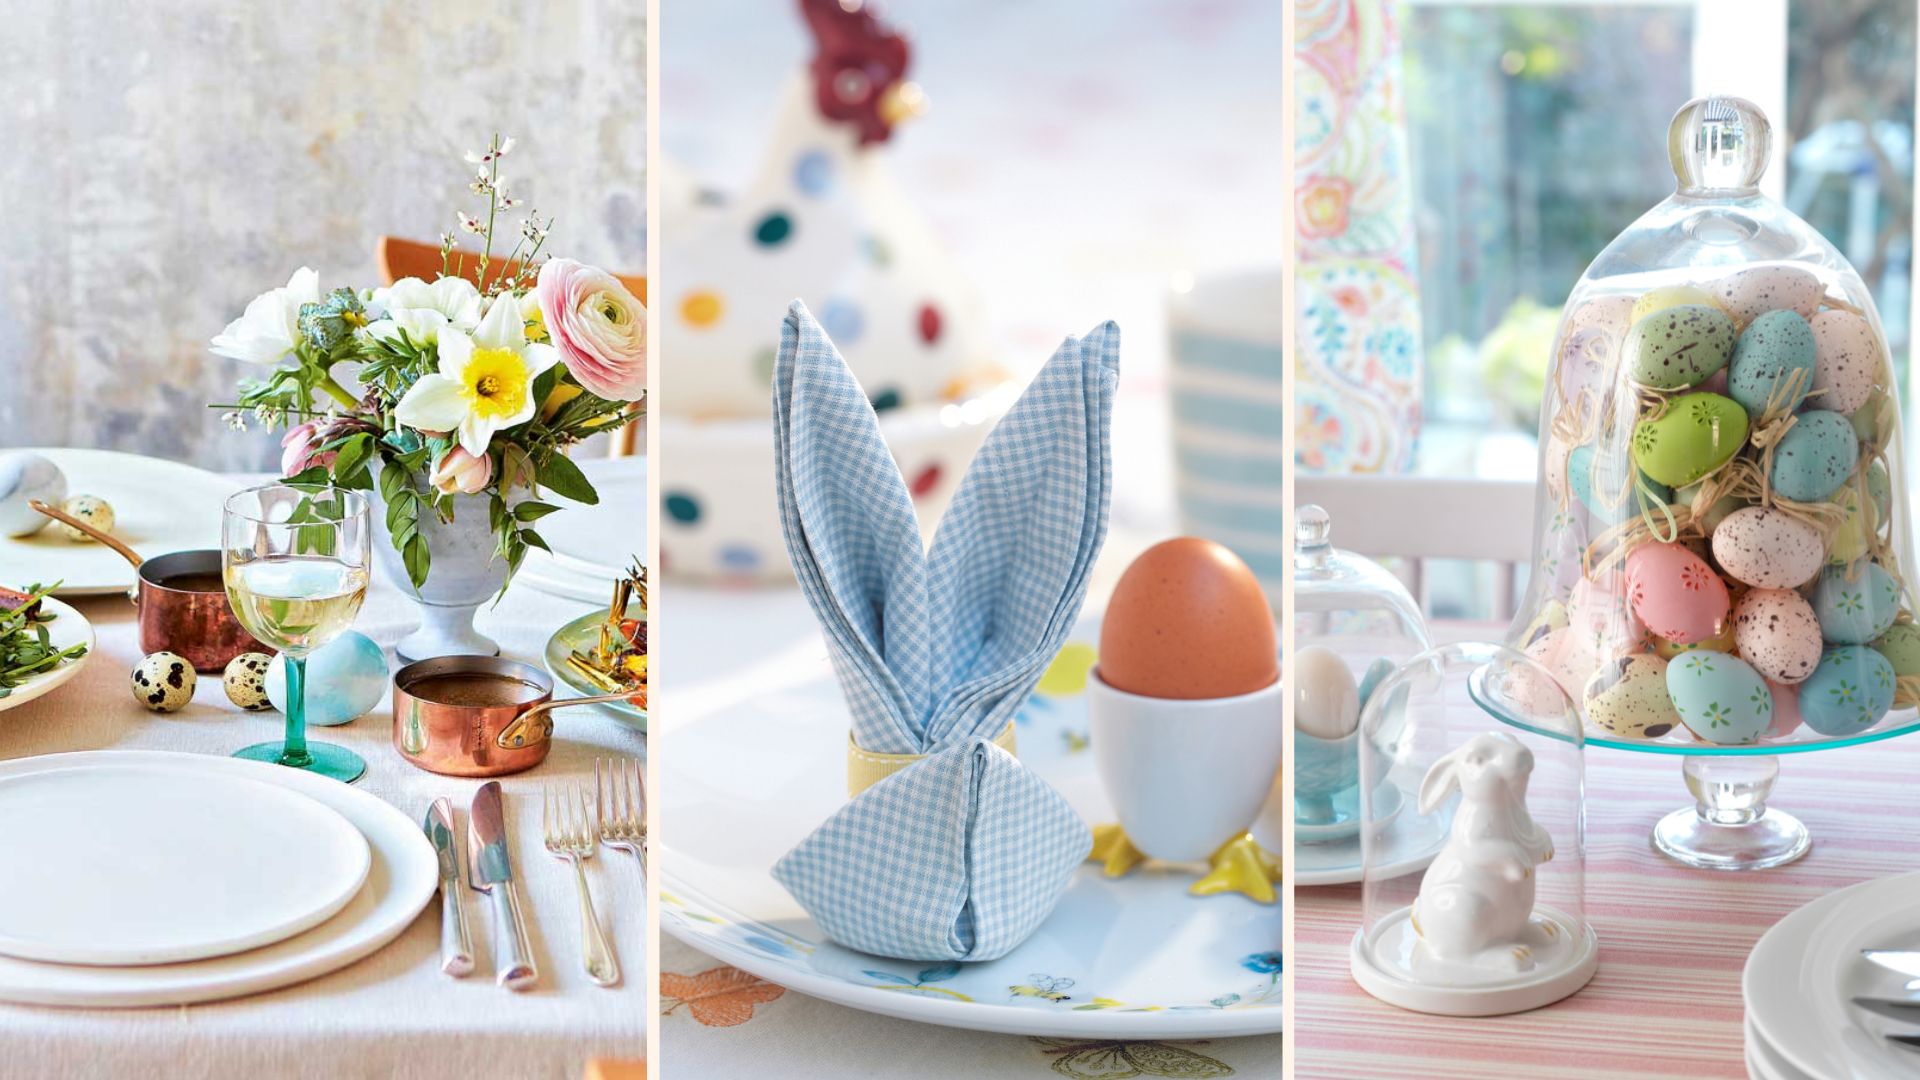 20 stylish Easter table decor and centerpiece ideas